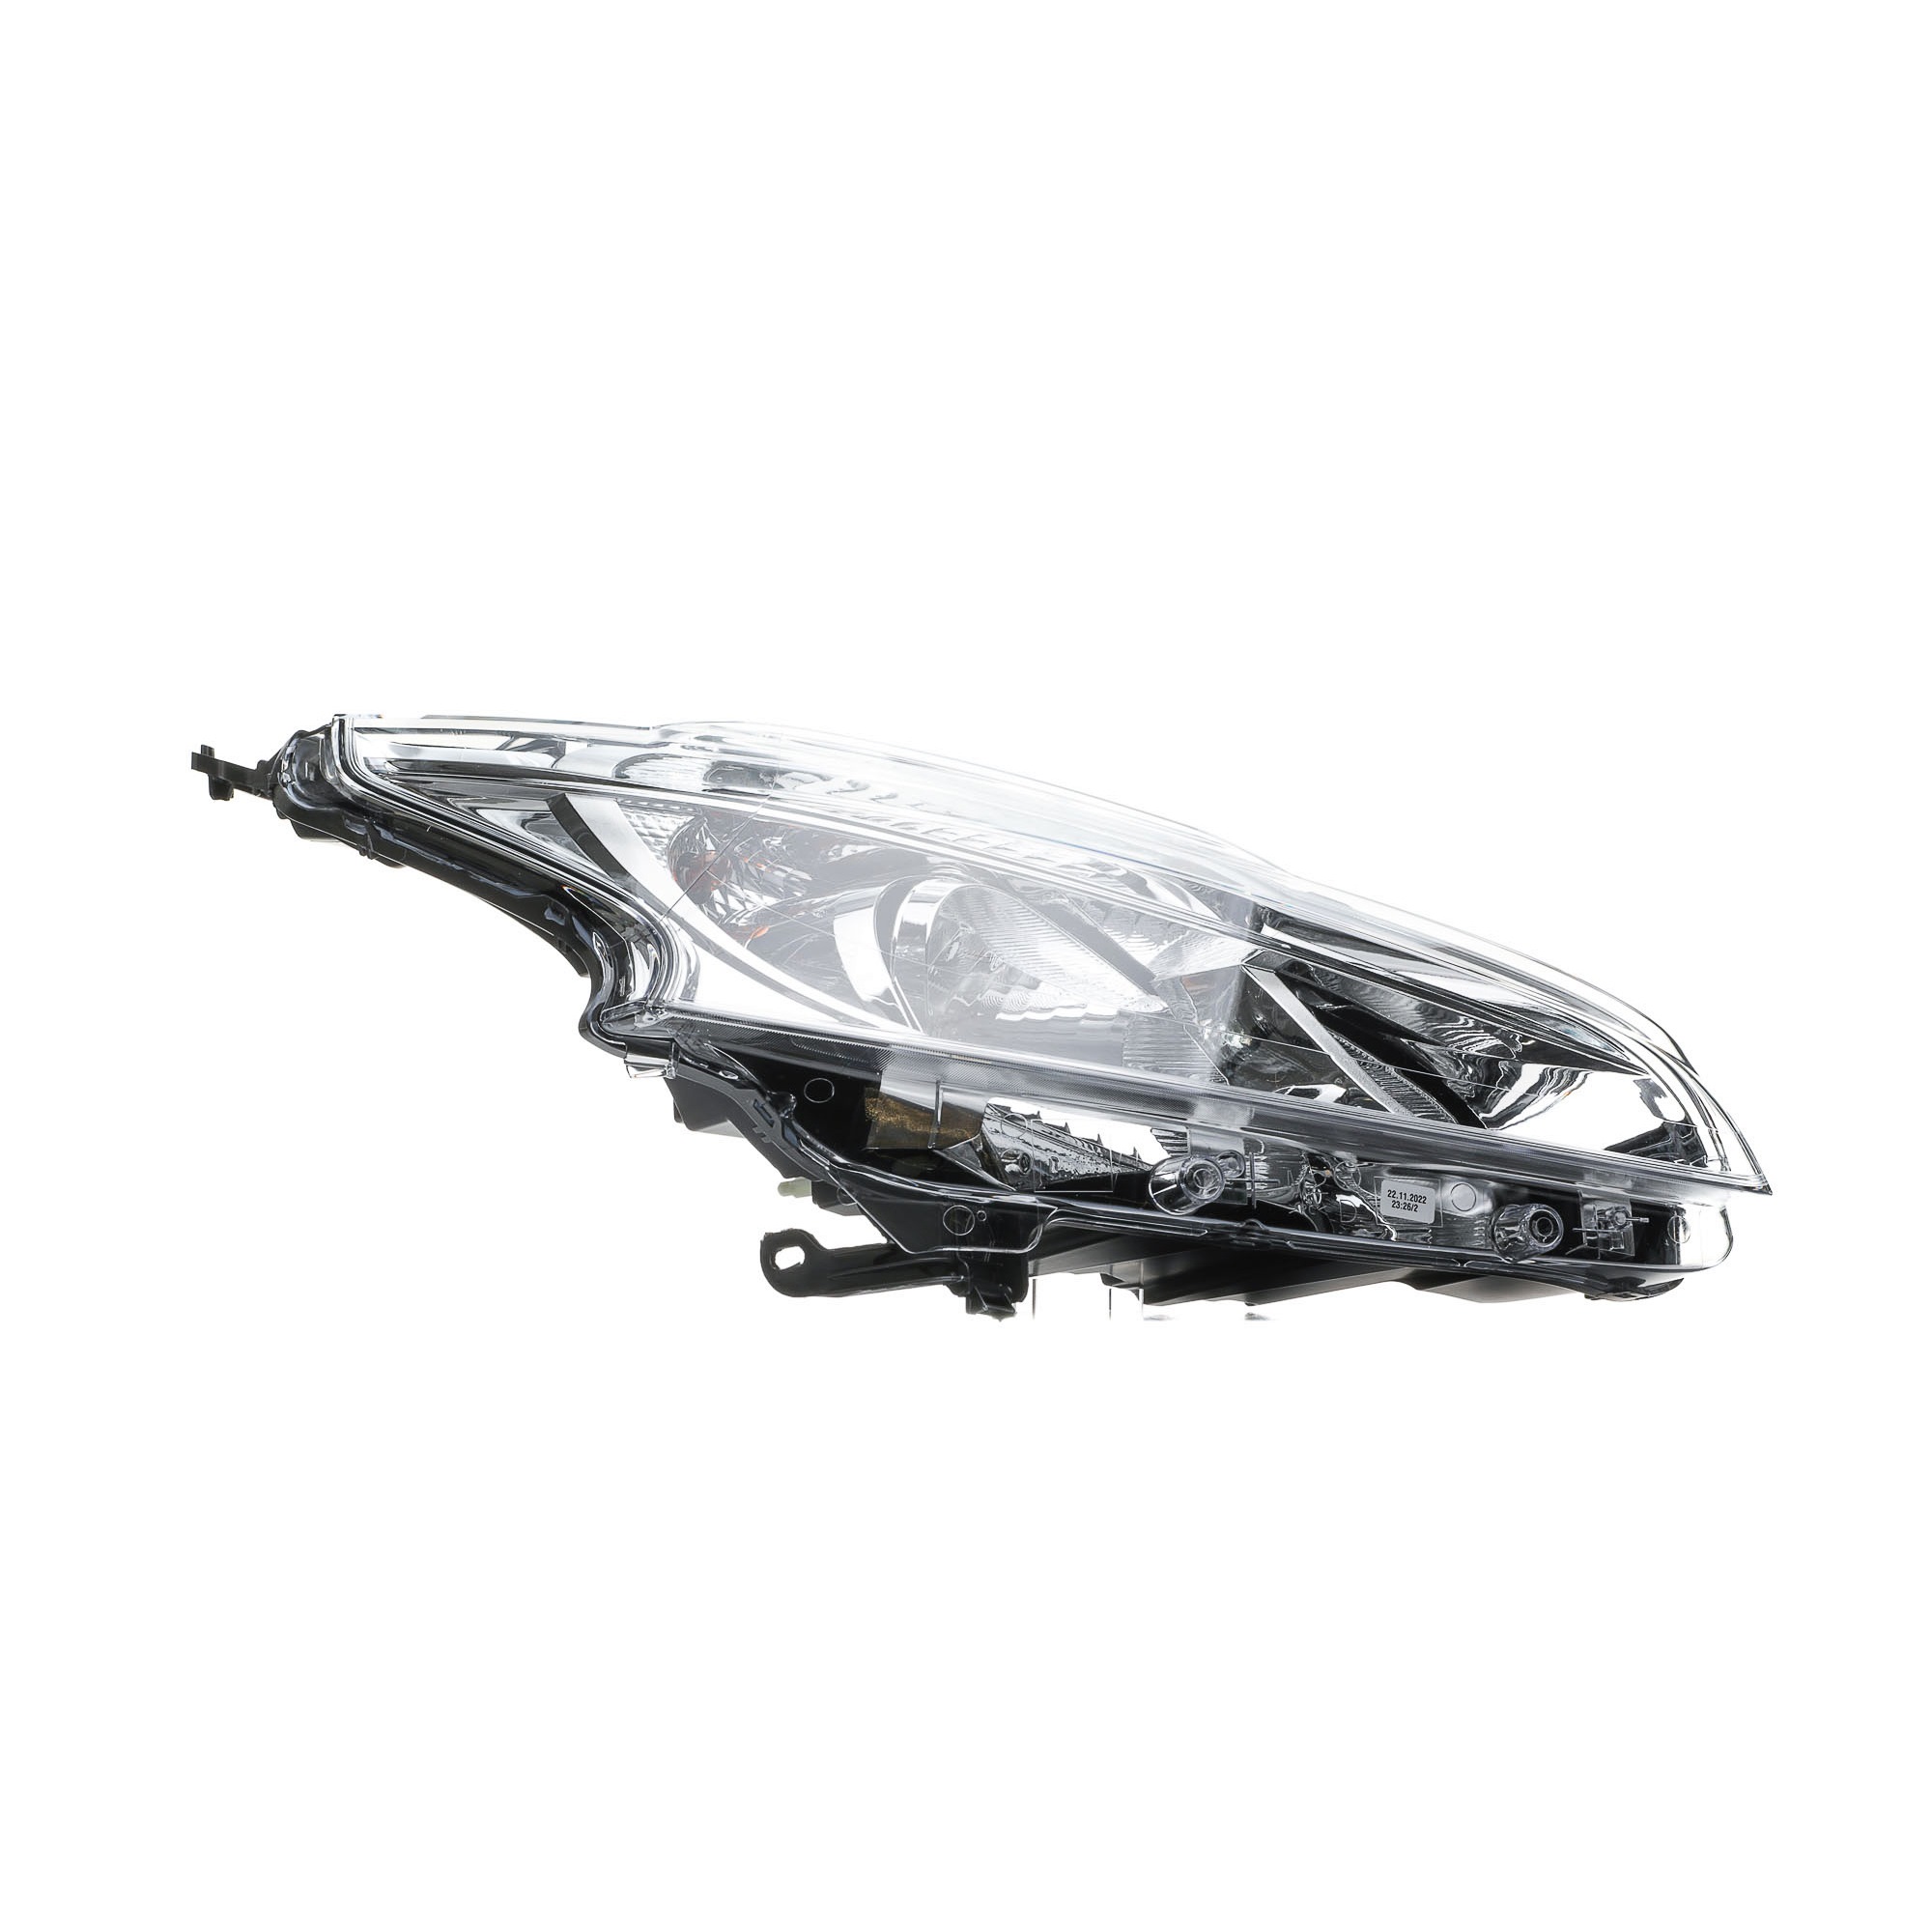 VALEO 044745 Headlight Right, H7, PWY24W, Halogen, transparent, with low beam, with daytime running light, for right-hand traffic, ORIGINAL PART, without motor for headlamp levelling